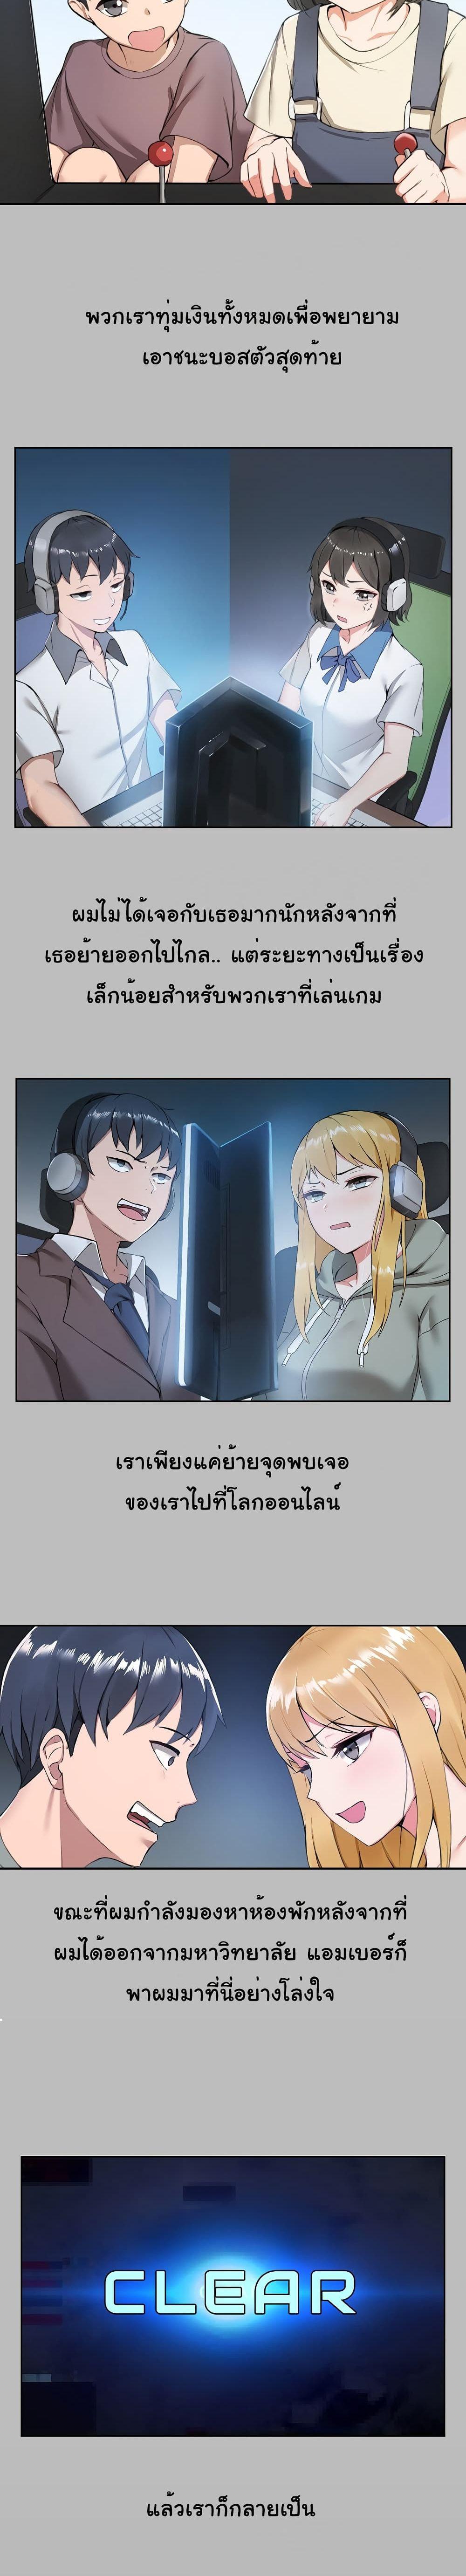 All About That Game Life 1 ภาพ 5